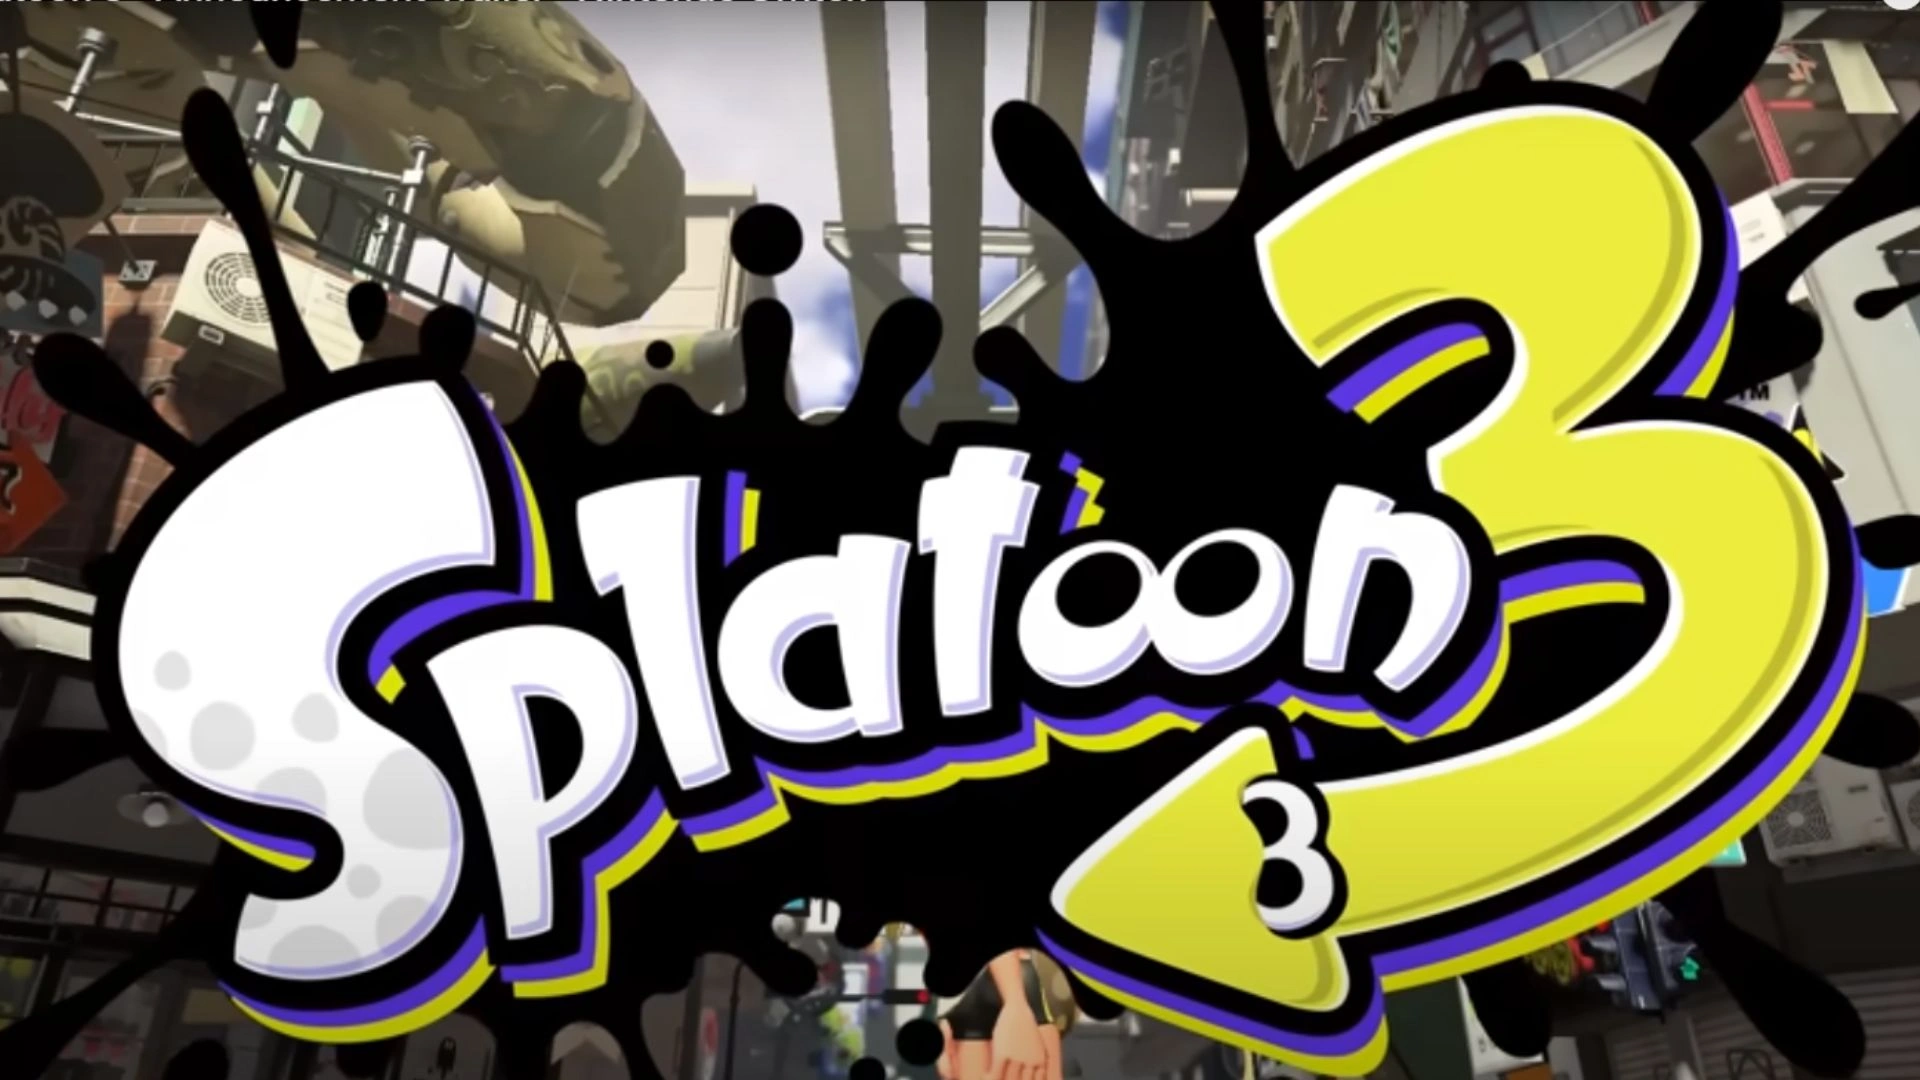 Splatoon 3 Parents Guide and Splatoon 3 Age Rating (2022)